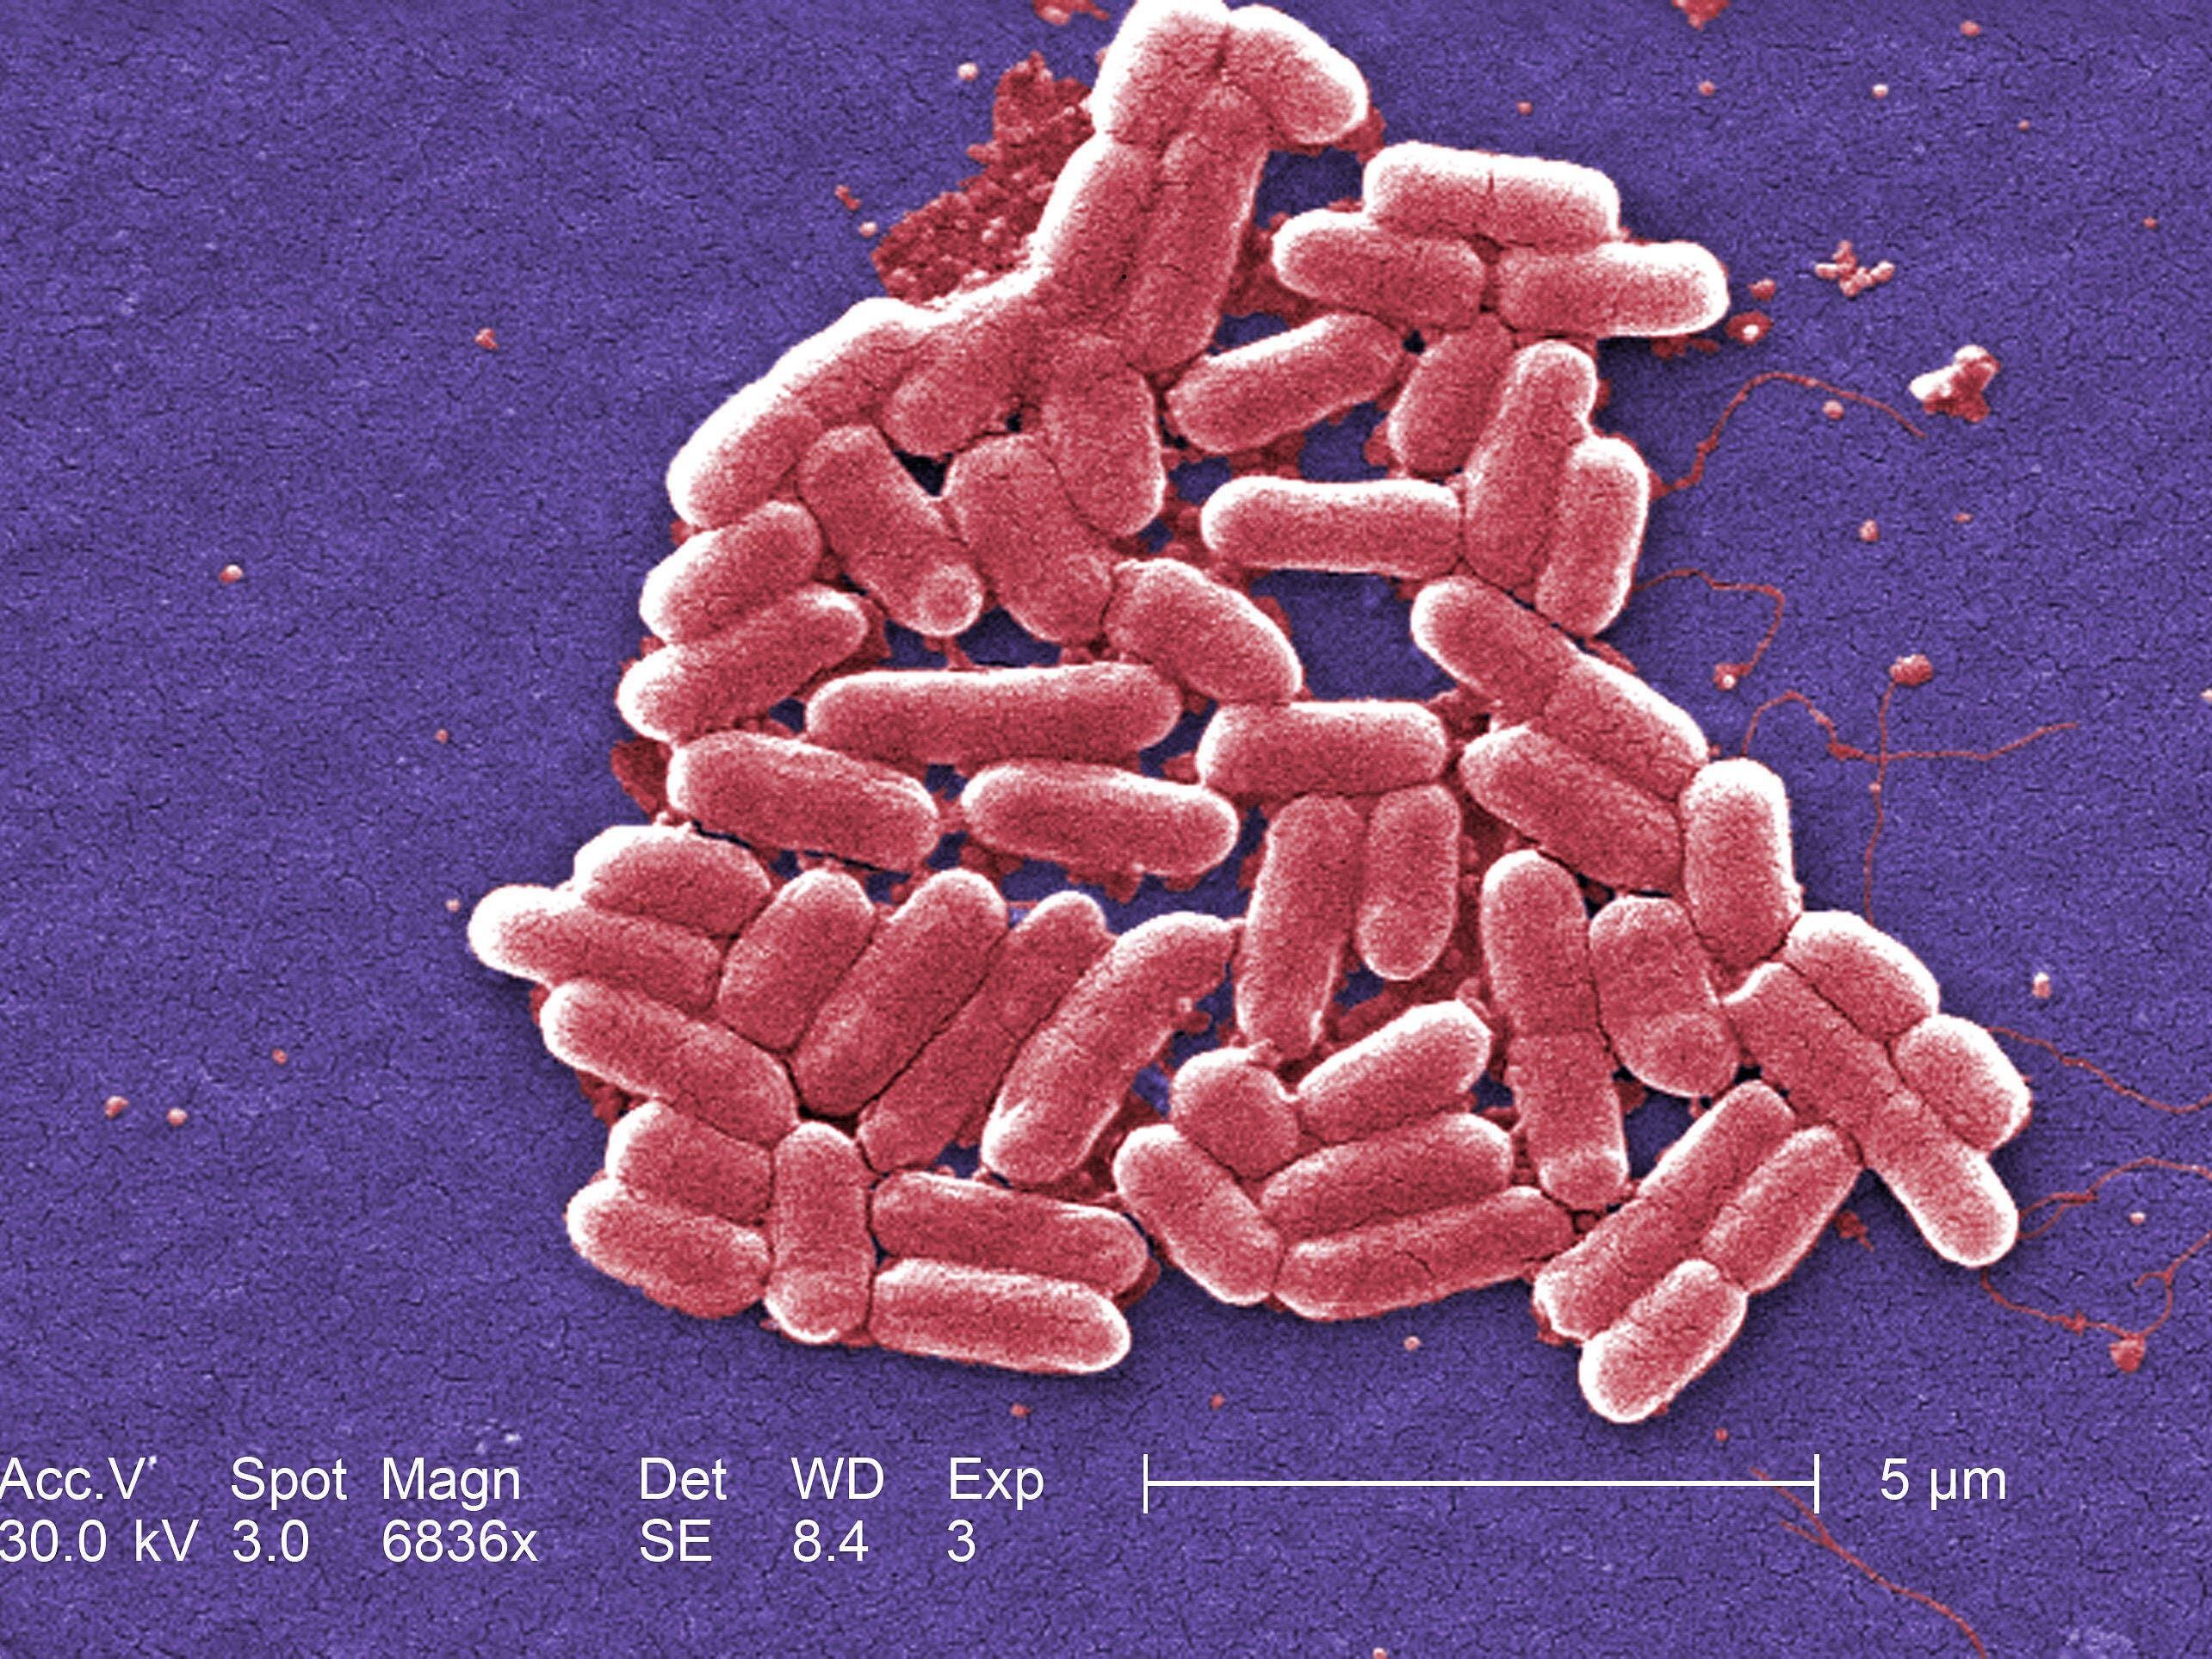 E. coli outbreak: 86 people taken to hospital but cases are slowing down